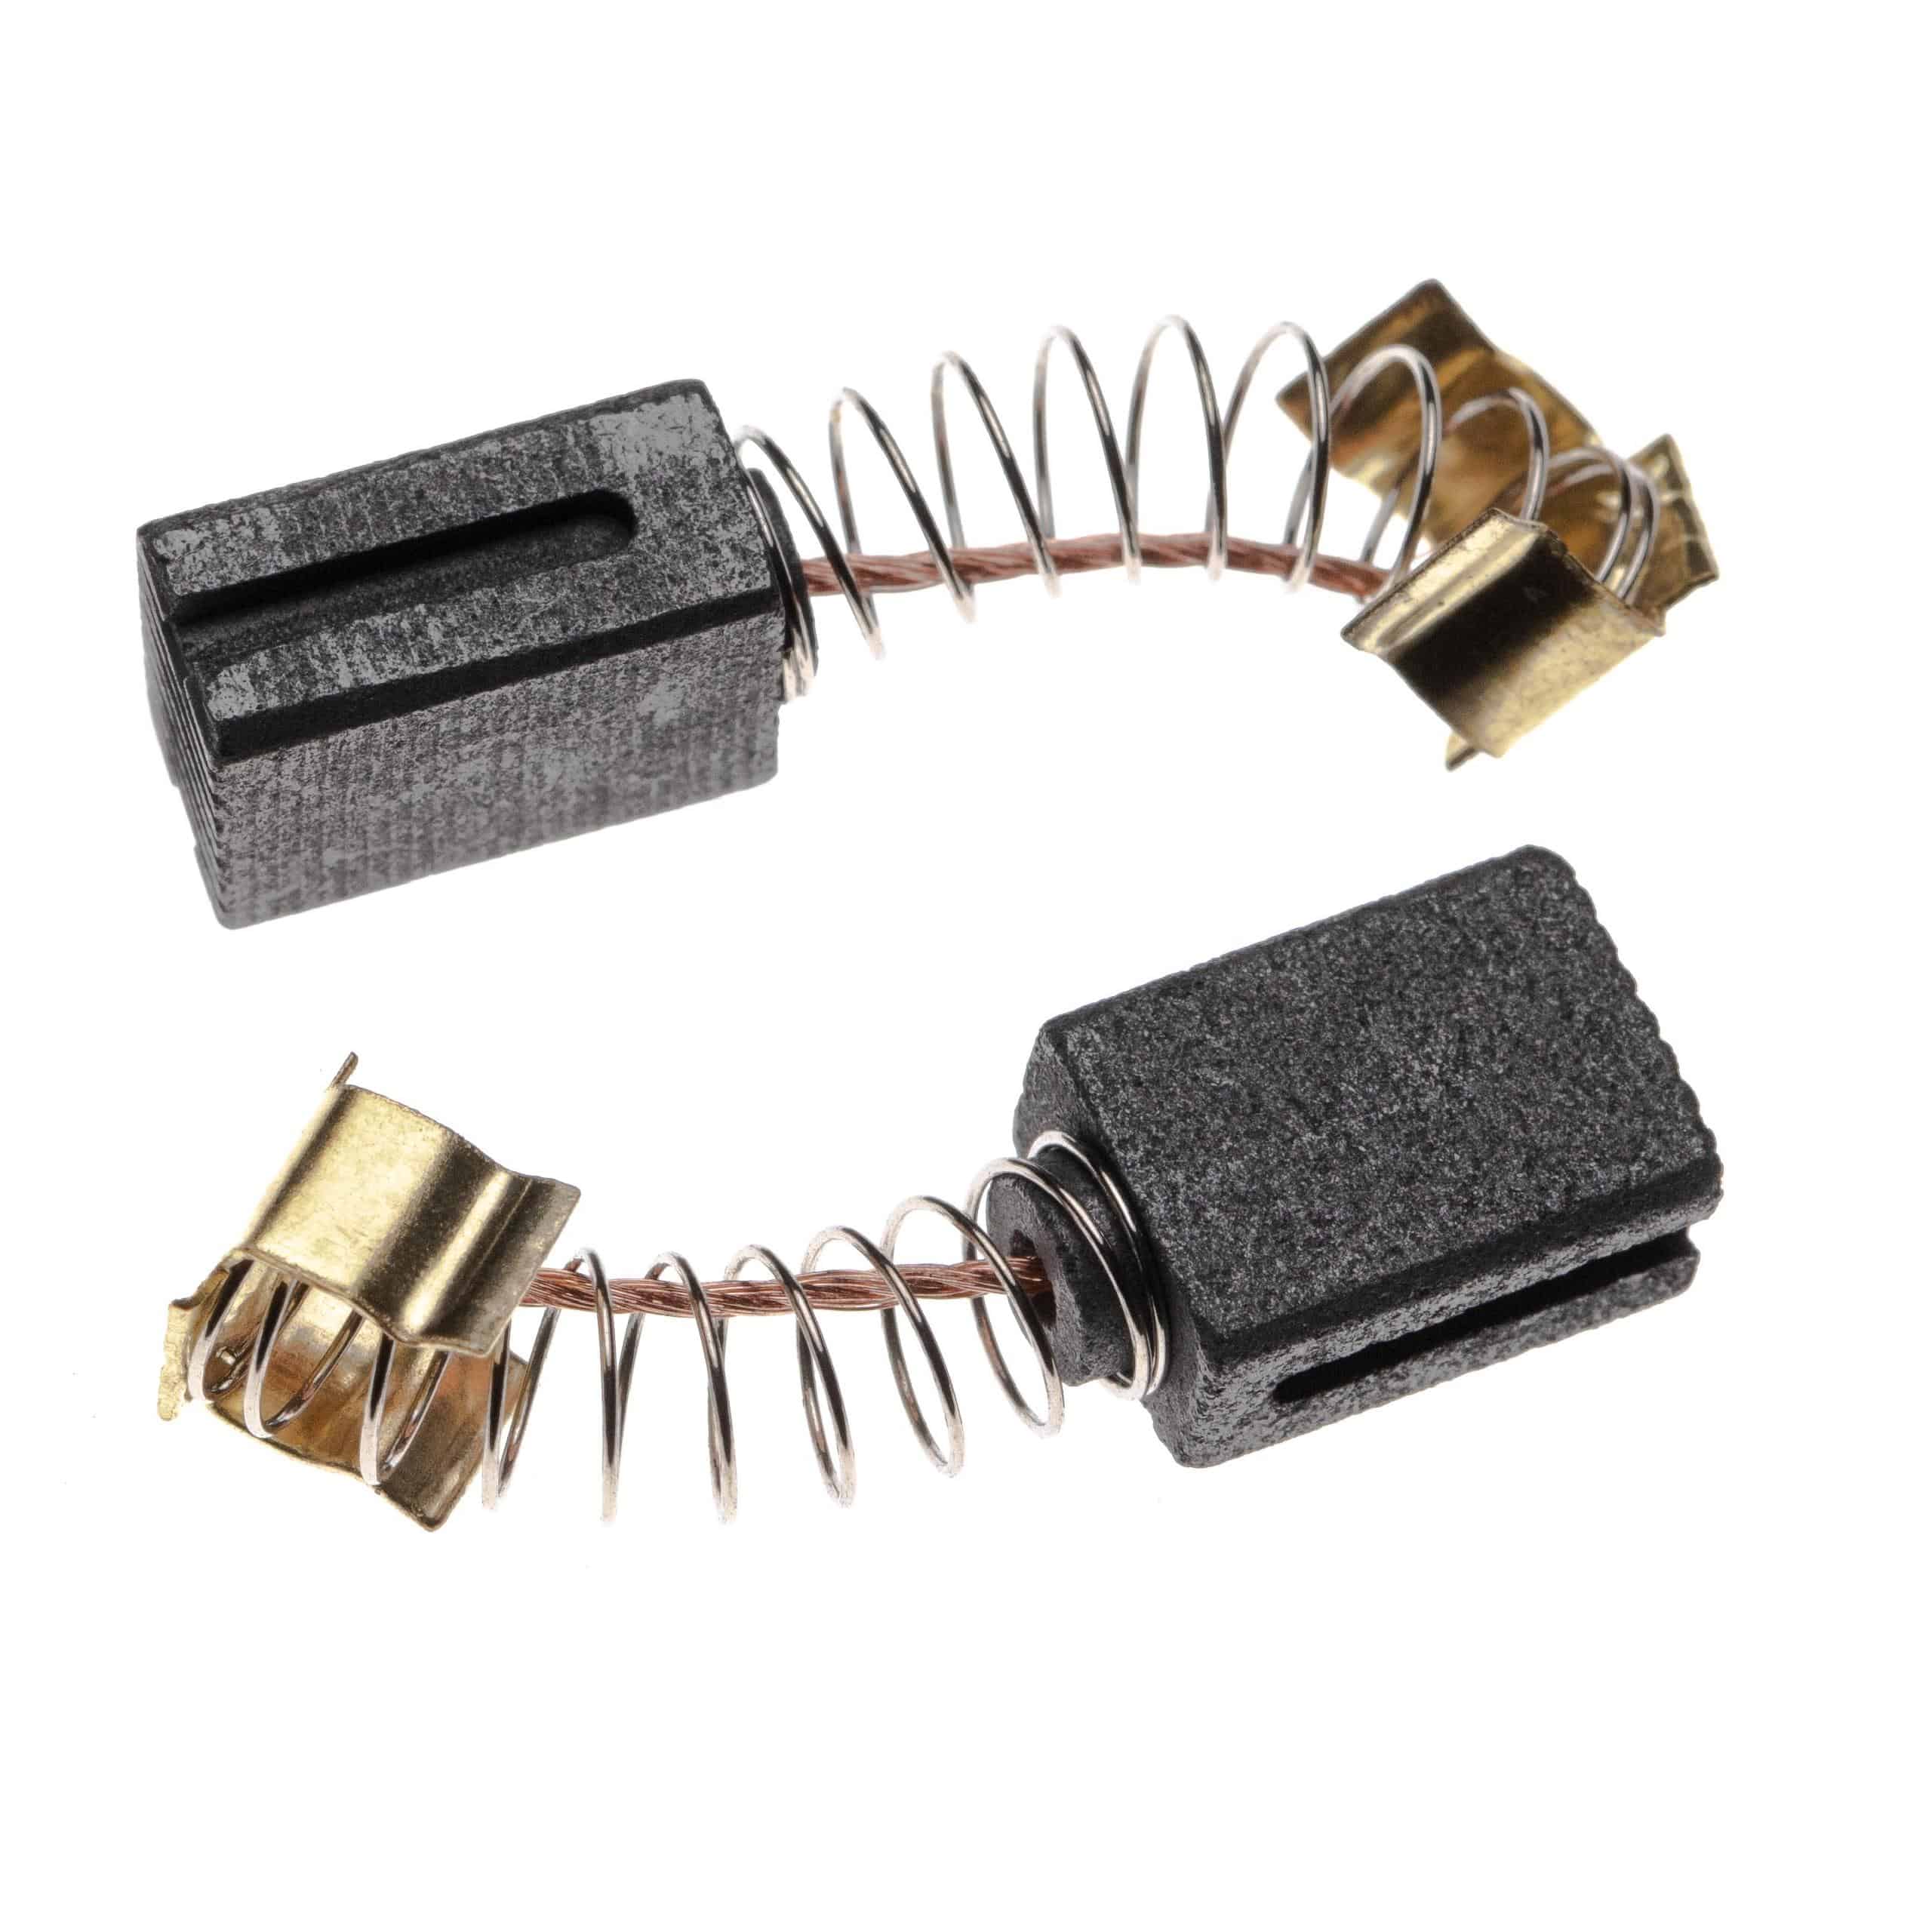 2x Carbon Brush as Replacement for Makita 195007-0 Electric Power Tools + Spring + Groove, 6 x 9 x 12mm